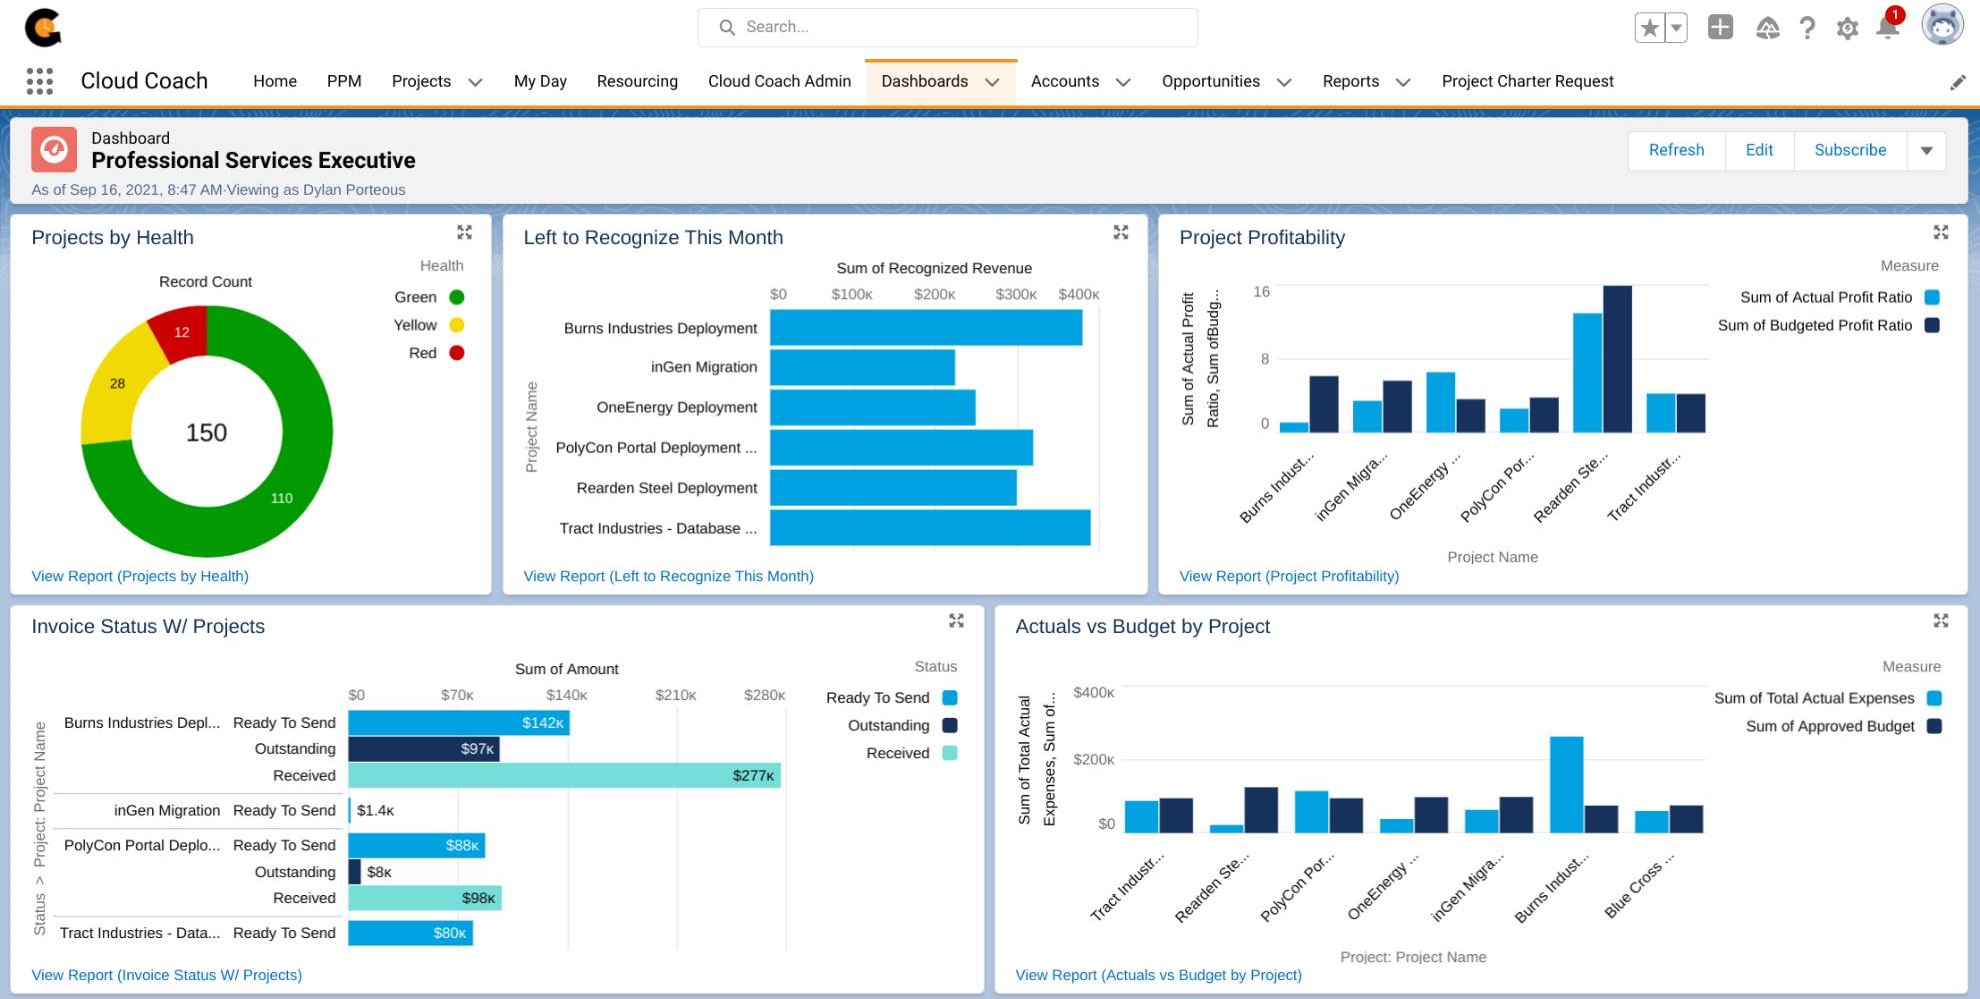 Professional Services Executive Dashboard